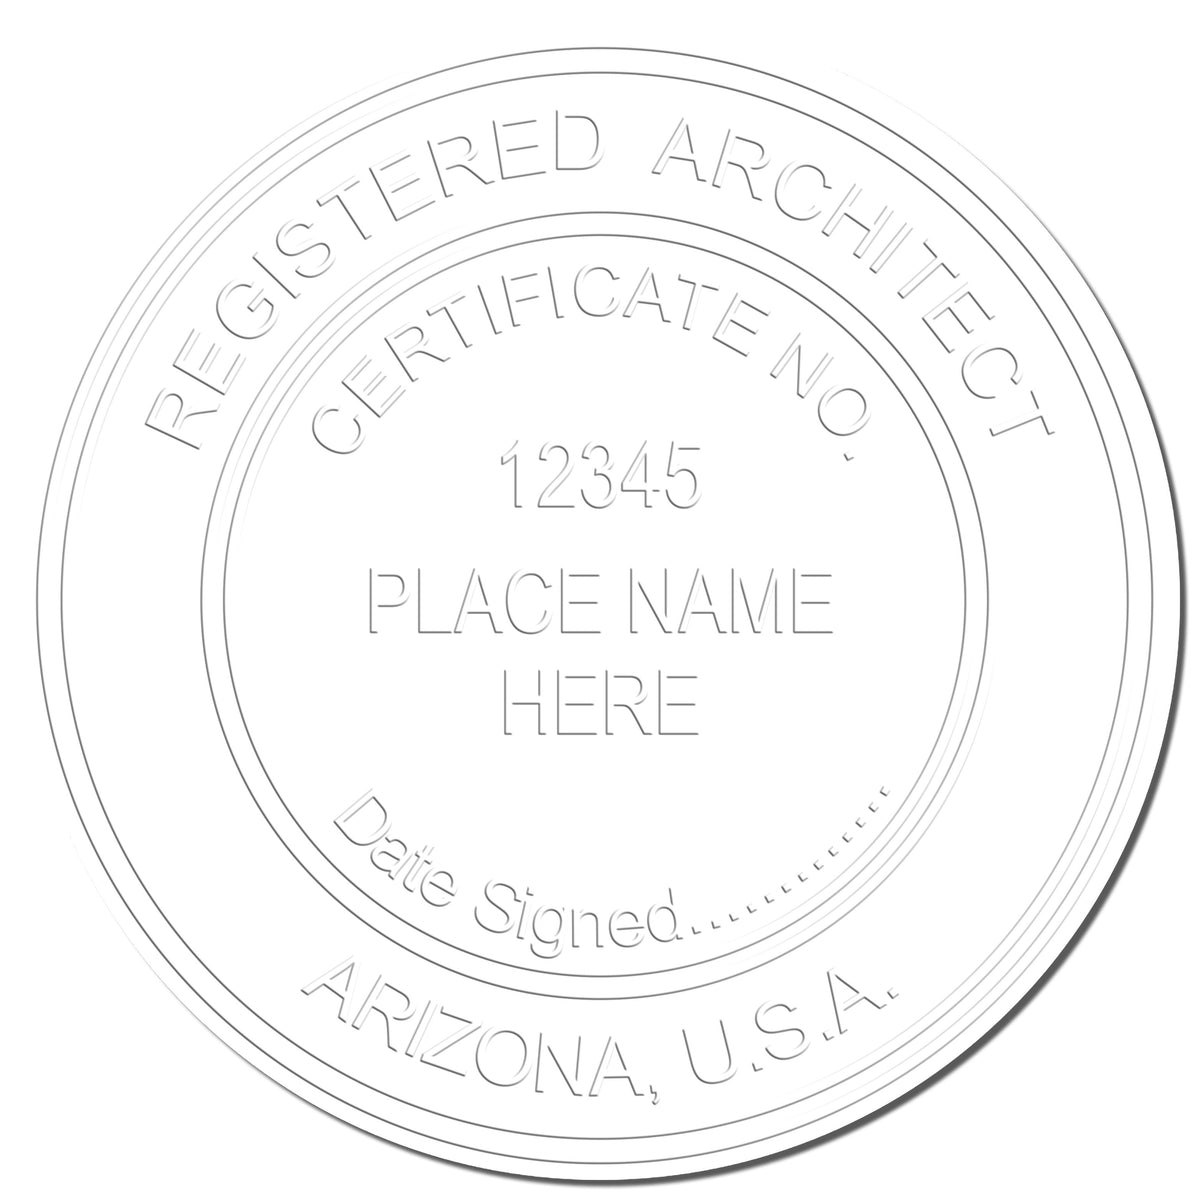 This paper is stamped with a sample imprint of the Hybrid Arizona Architect Seal, signifying its quality and reliability.